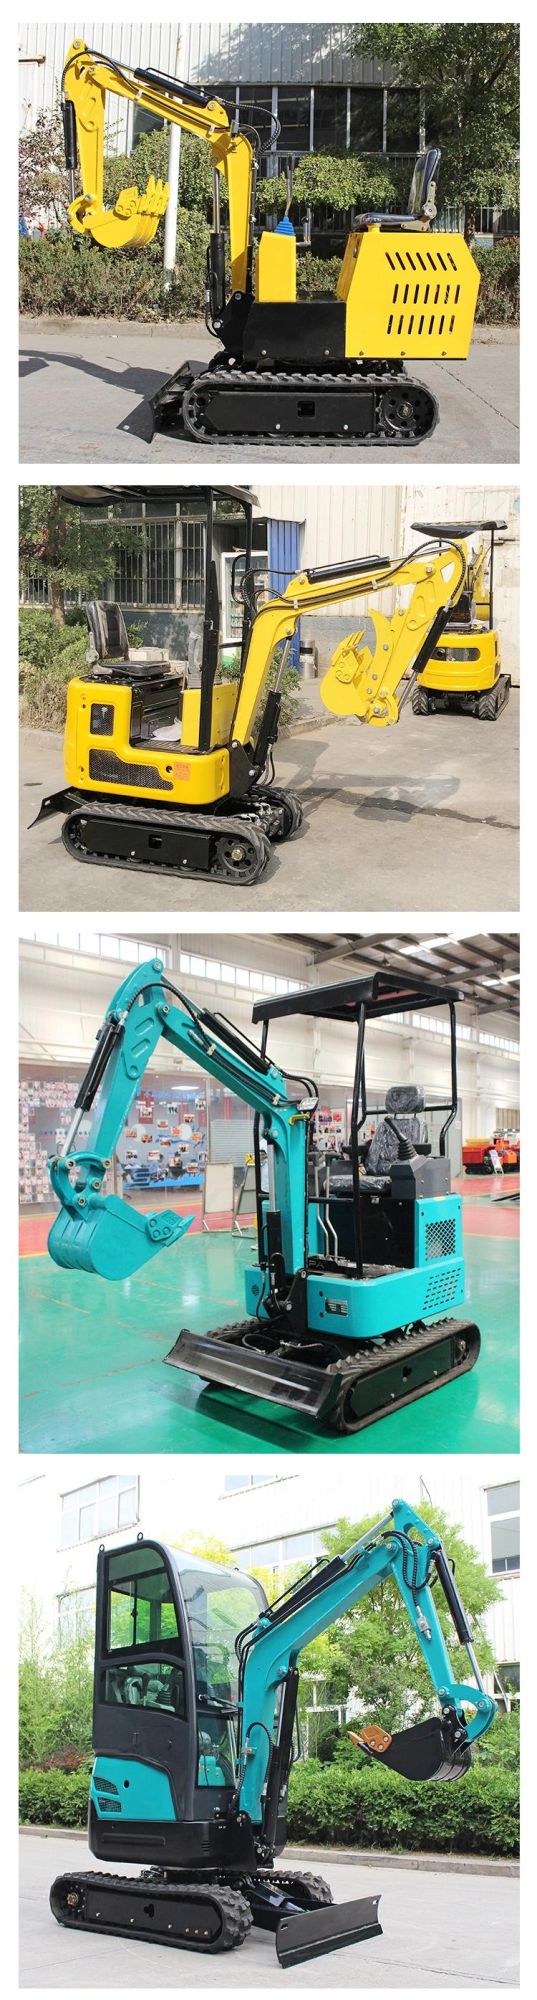 Huaya New High Quality Mini Hydraulic Crawler Excavator Digger with Canopy for Sale Micro Excavators Price Chinese Compact Excavation Machinery Farm Garden CE